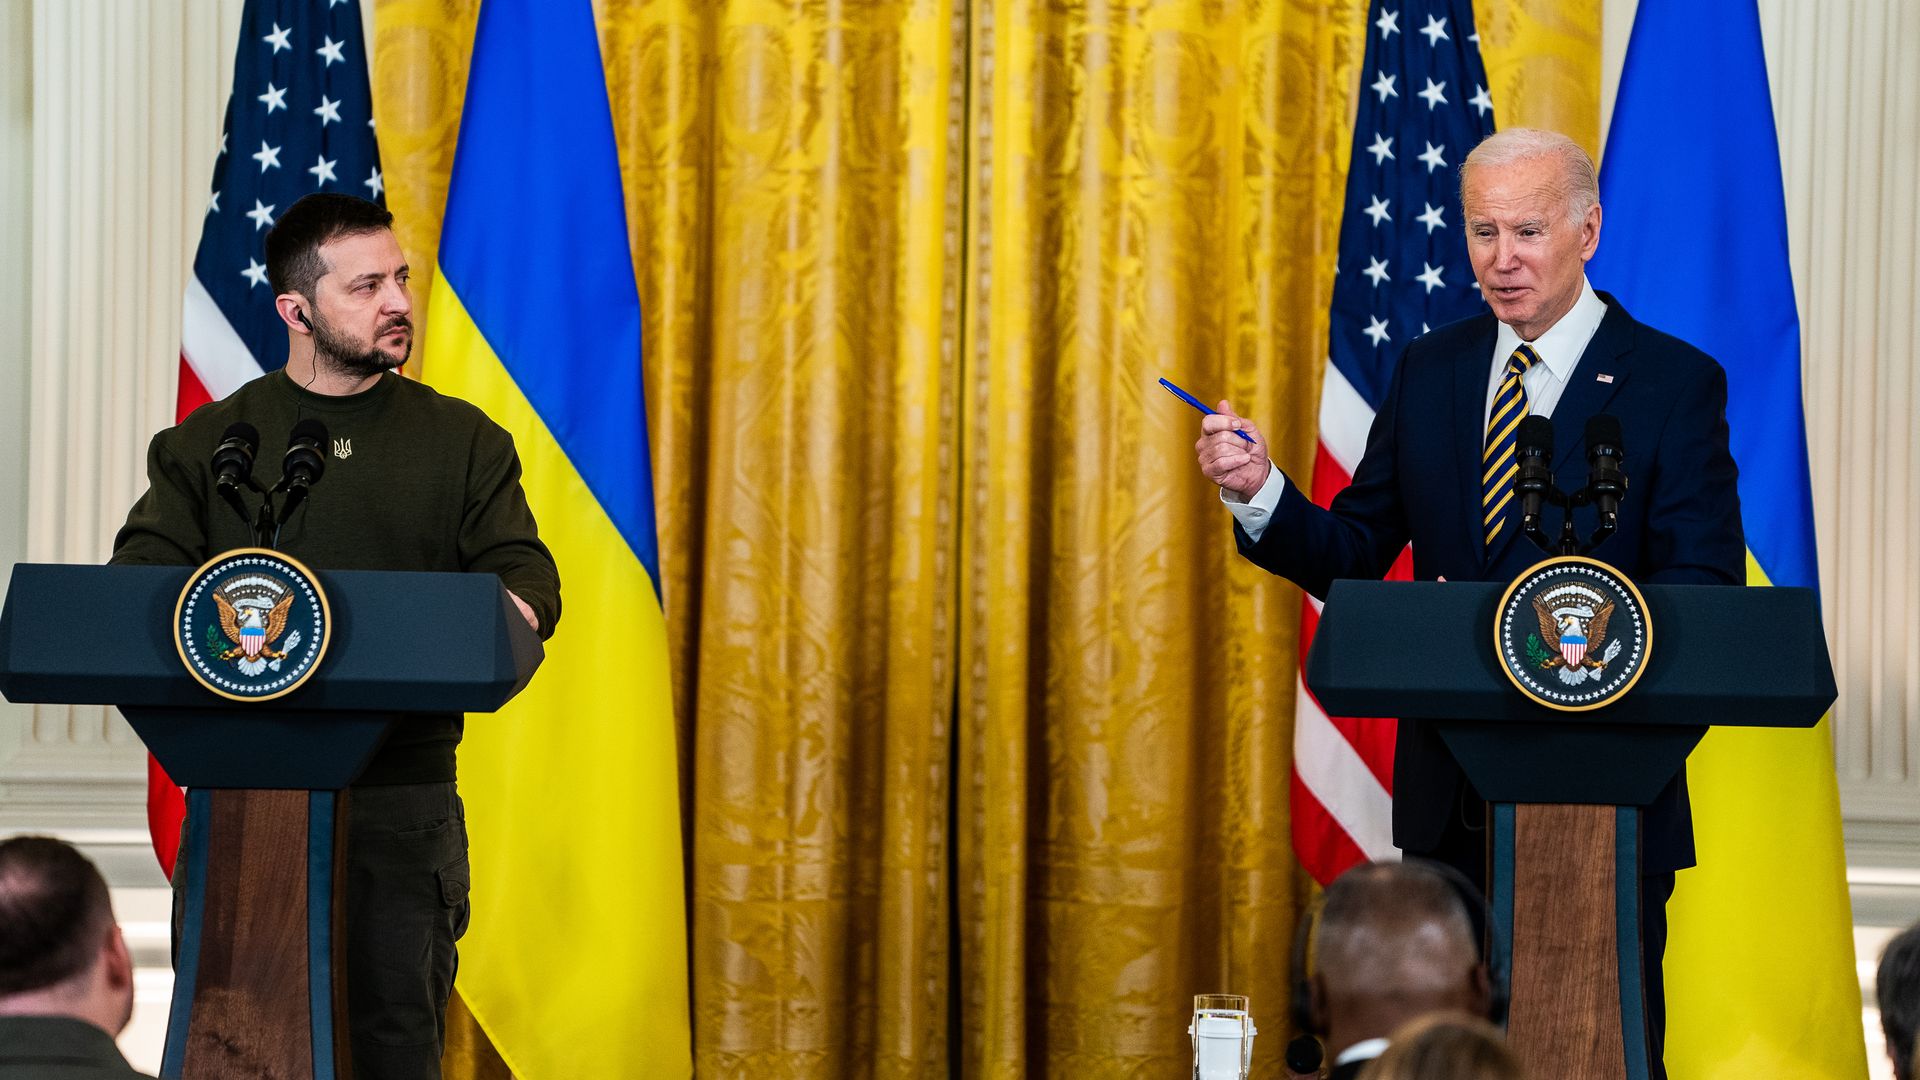 President Biden (R) holds a joint press conference with Ukrainian President Volodymyr Zelensky last month. Photo: Alex Wong/Getty Images